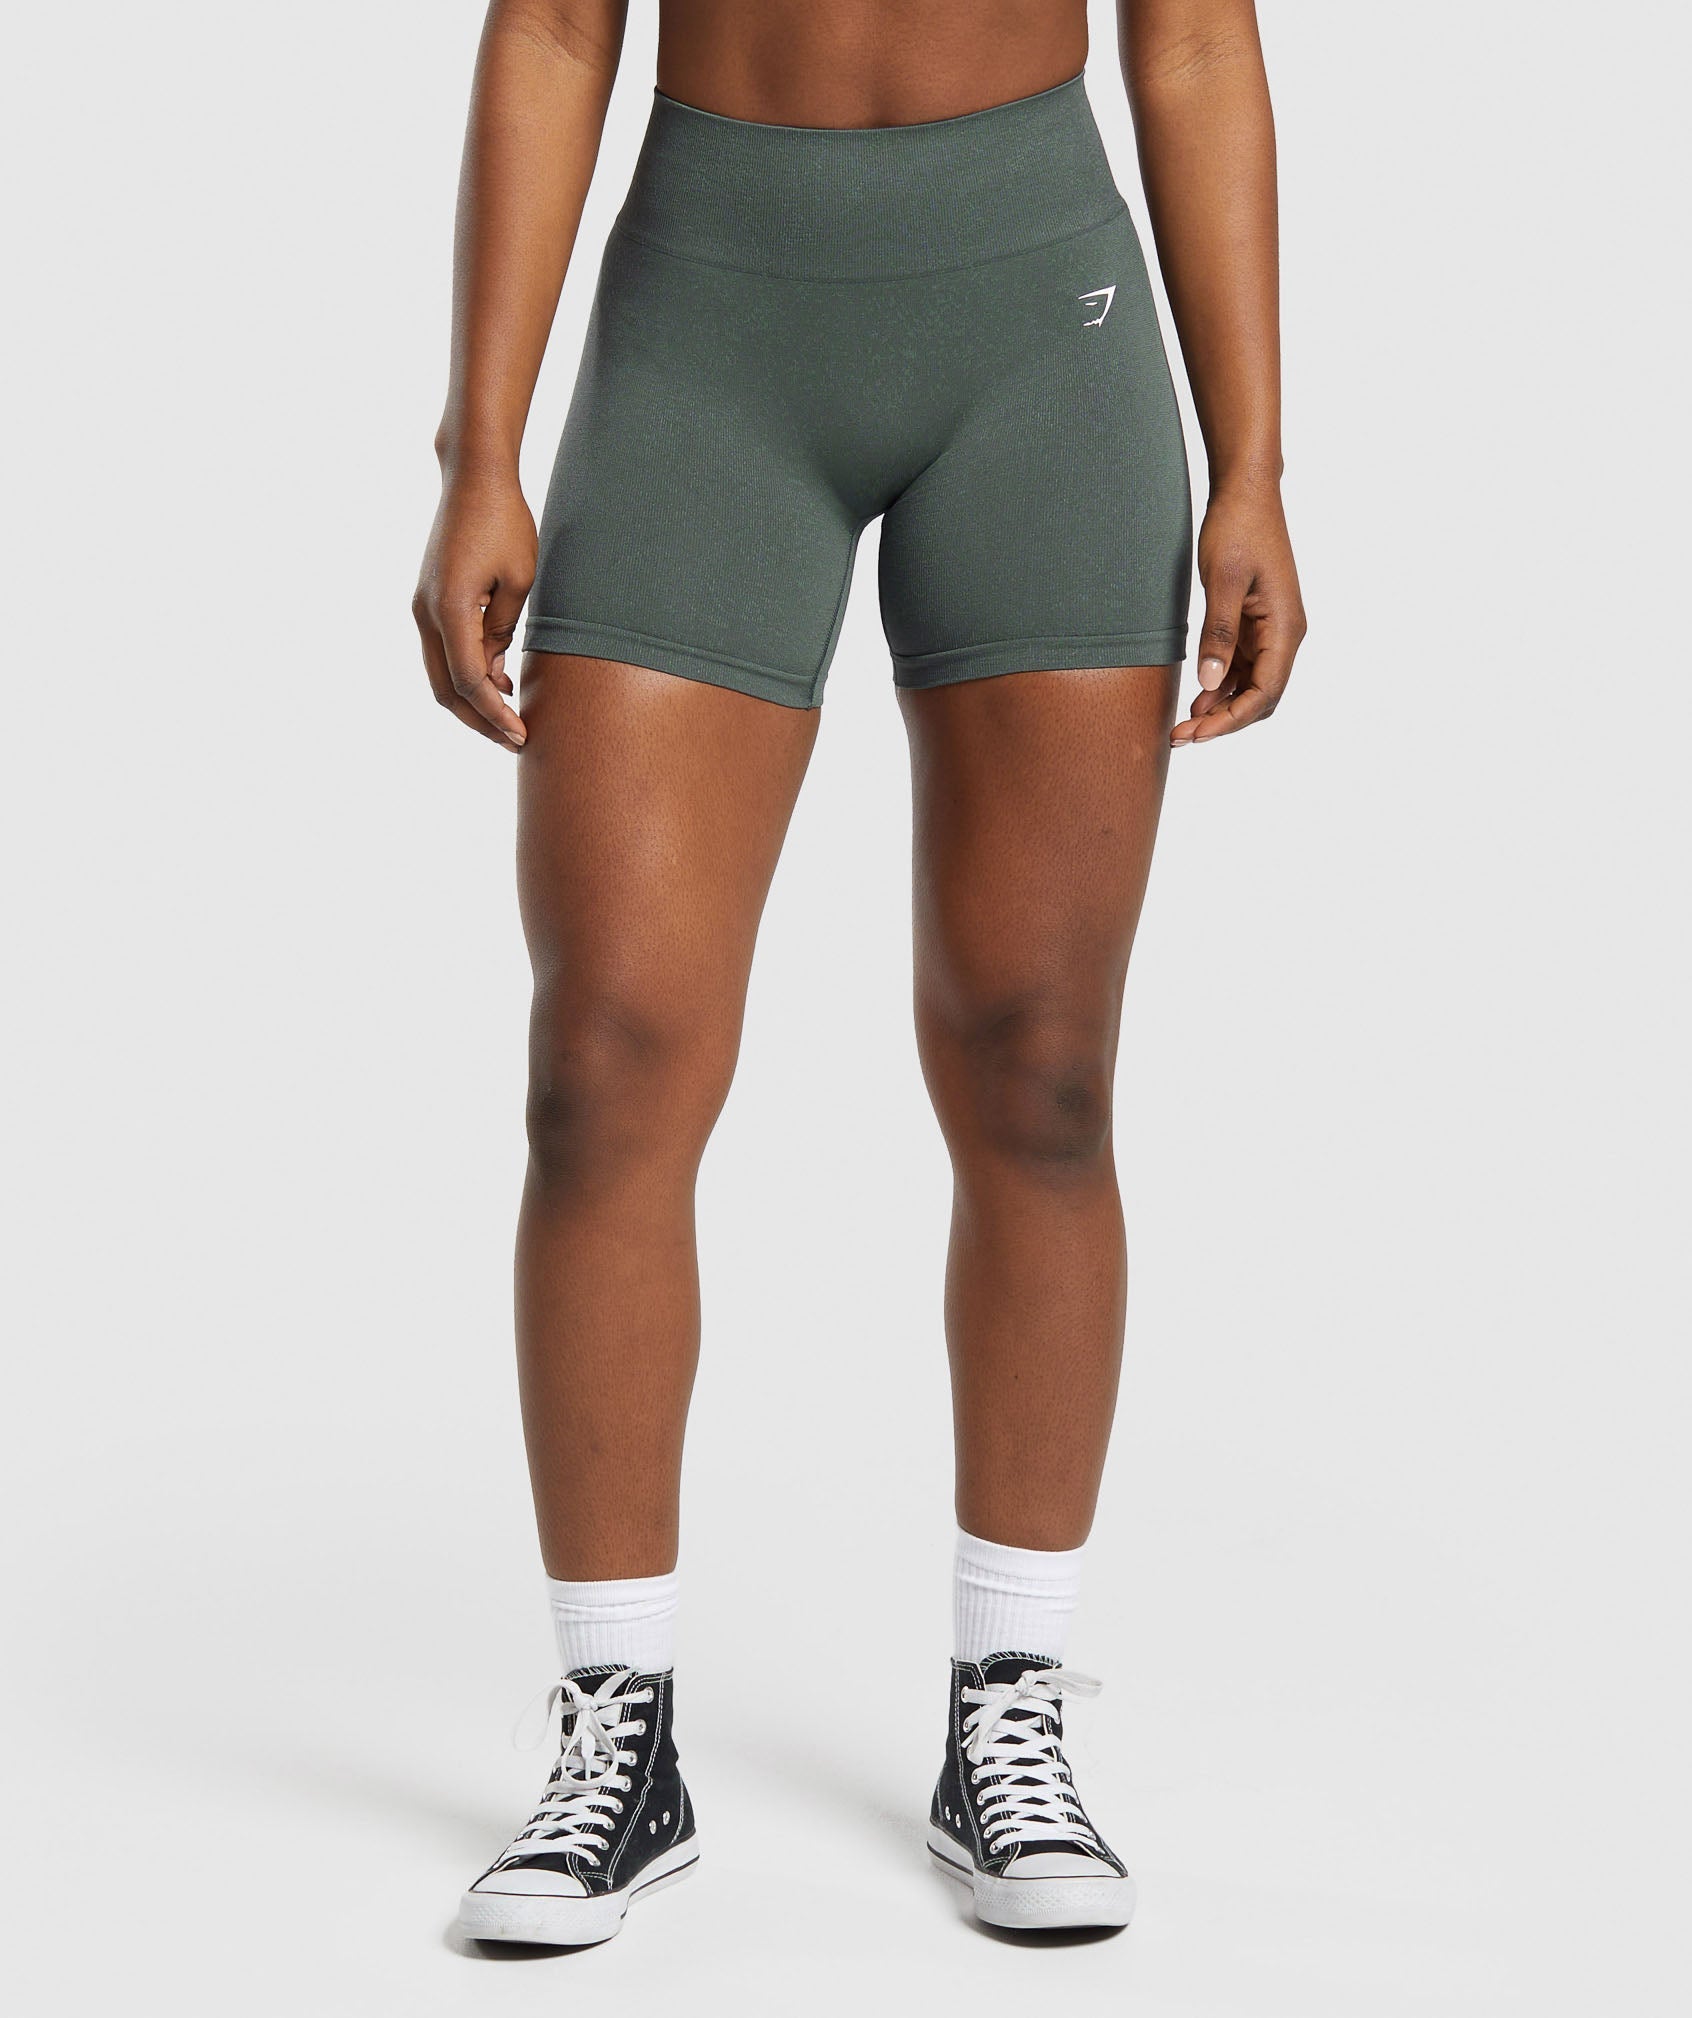 Adapt Seamless Fleck Shorts in Slate Teal/Cargo Teal